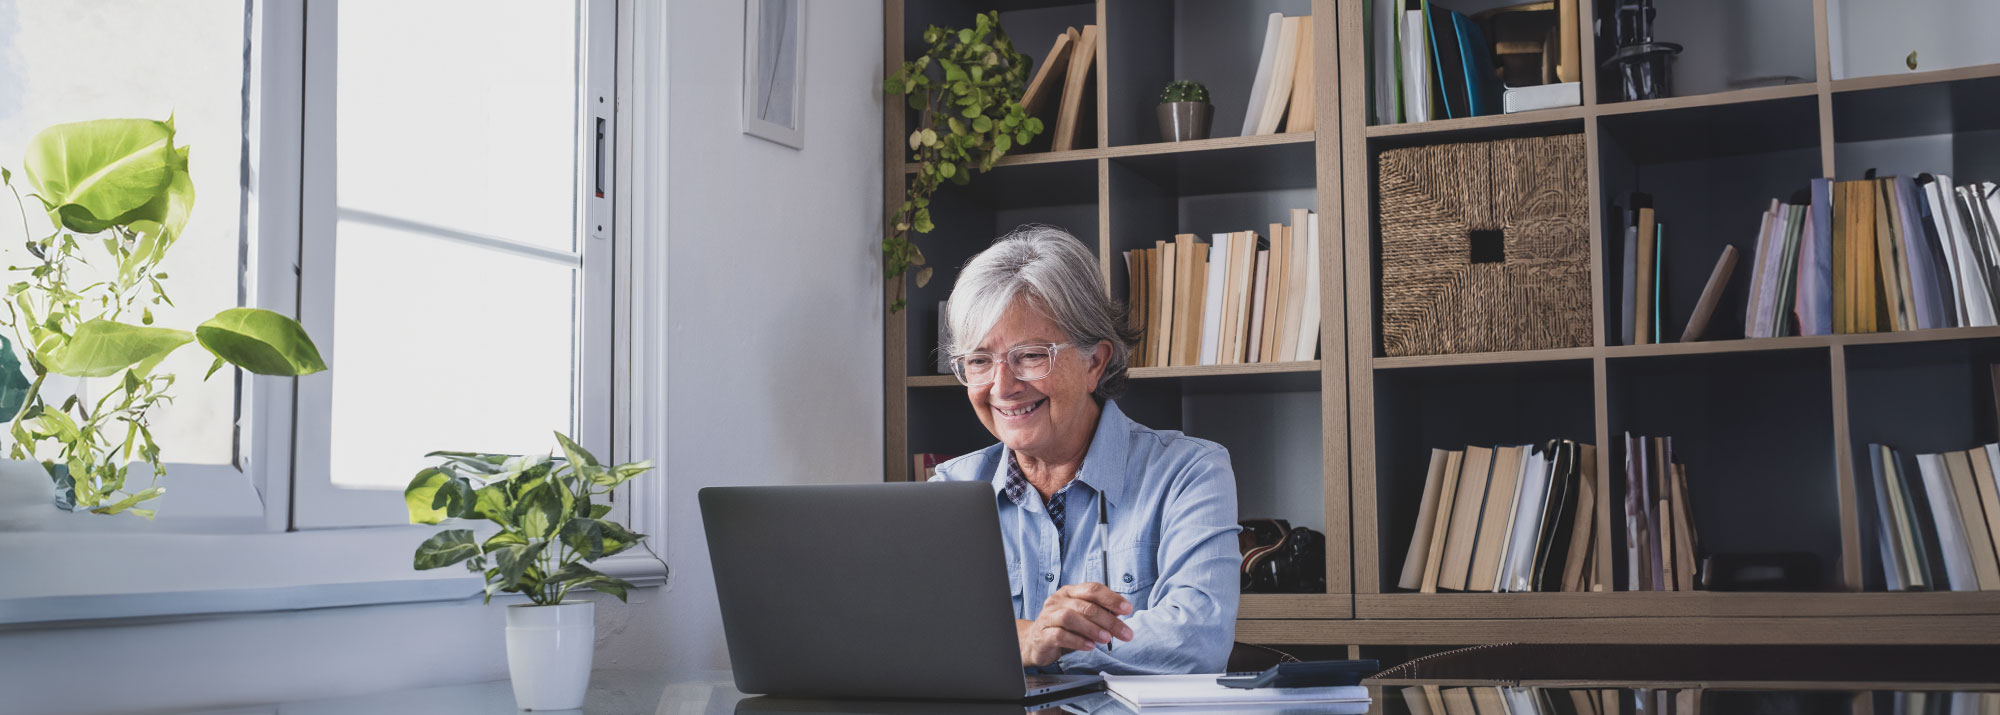 Guardian Credit Union member smiling while checking that her financial information is safe and secure online.